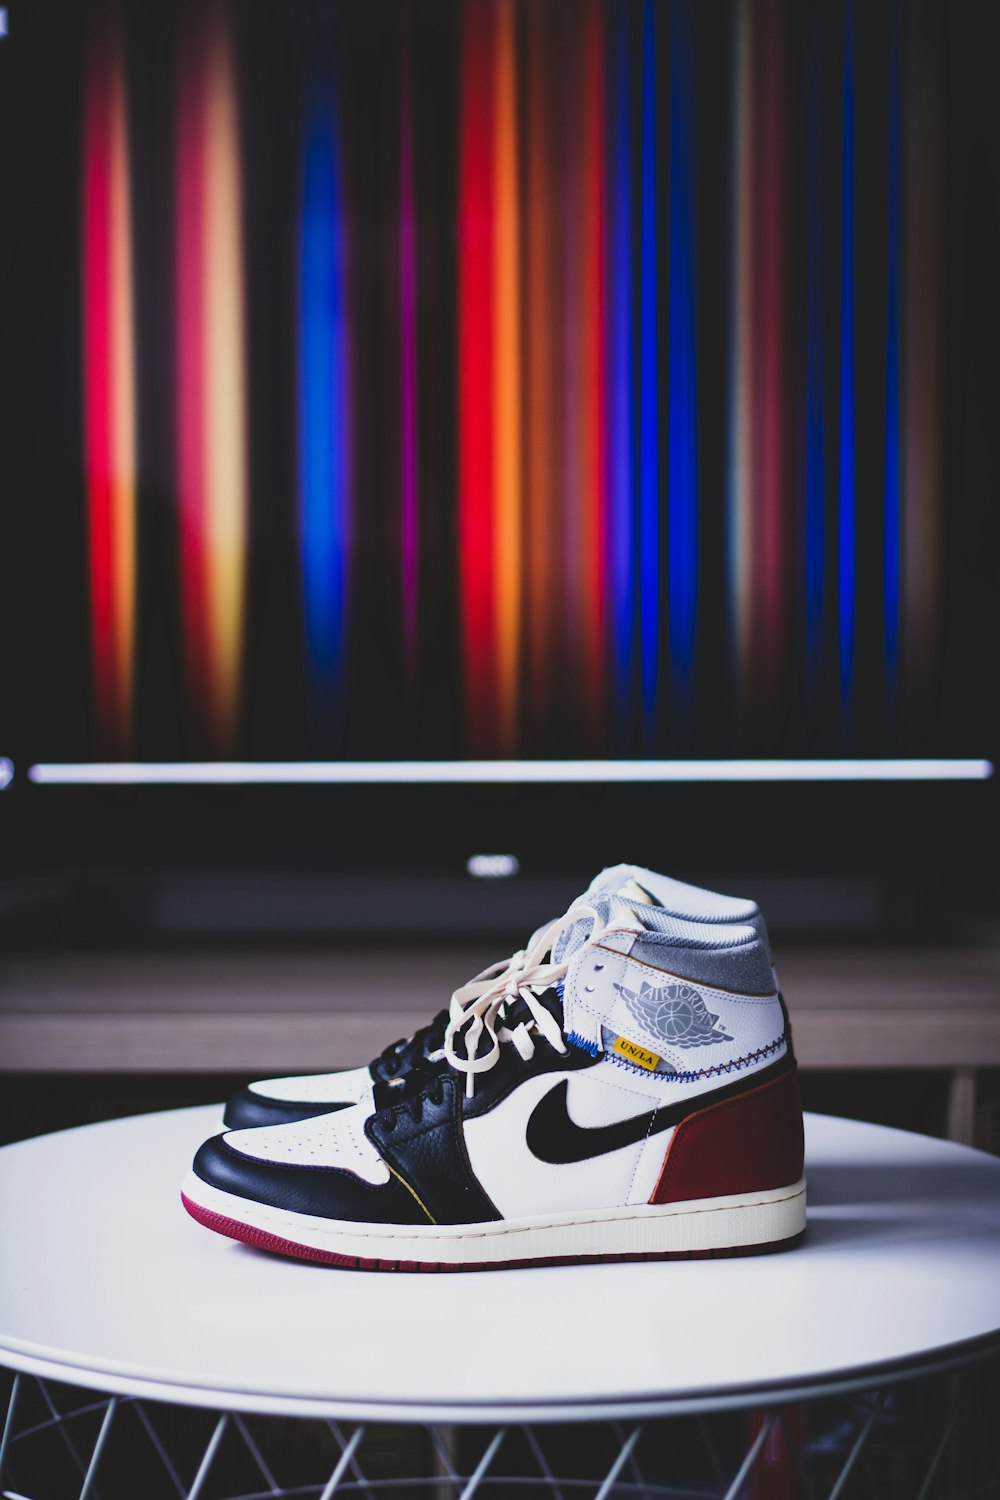 White Red And Black Air Jordan 1 S On White Wooden Table Photo Free Image On Unsplash